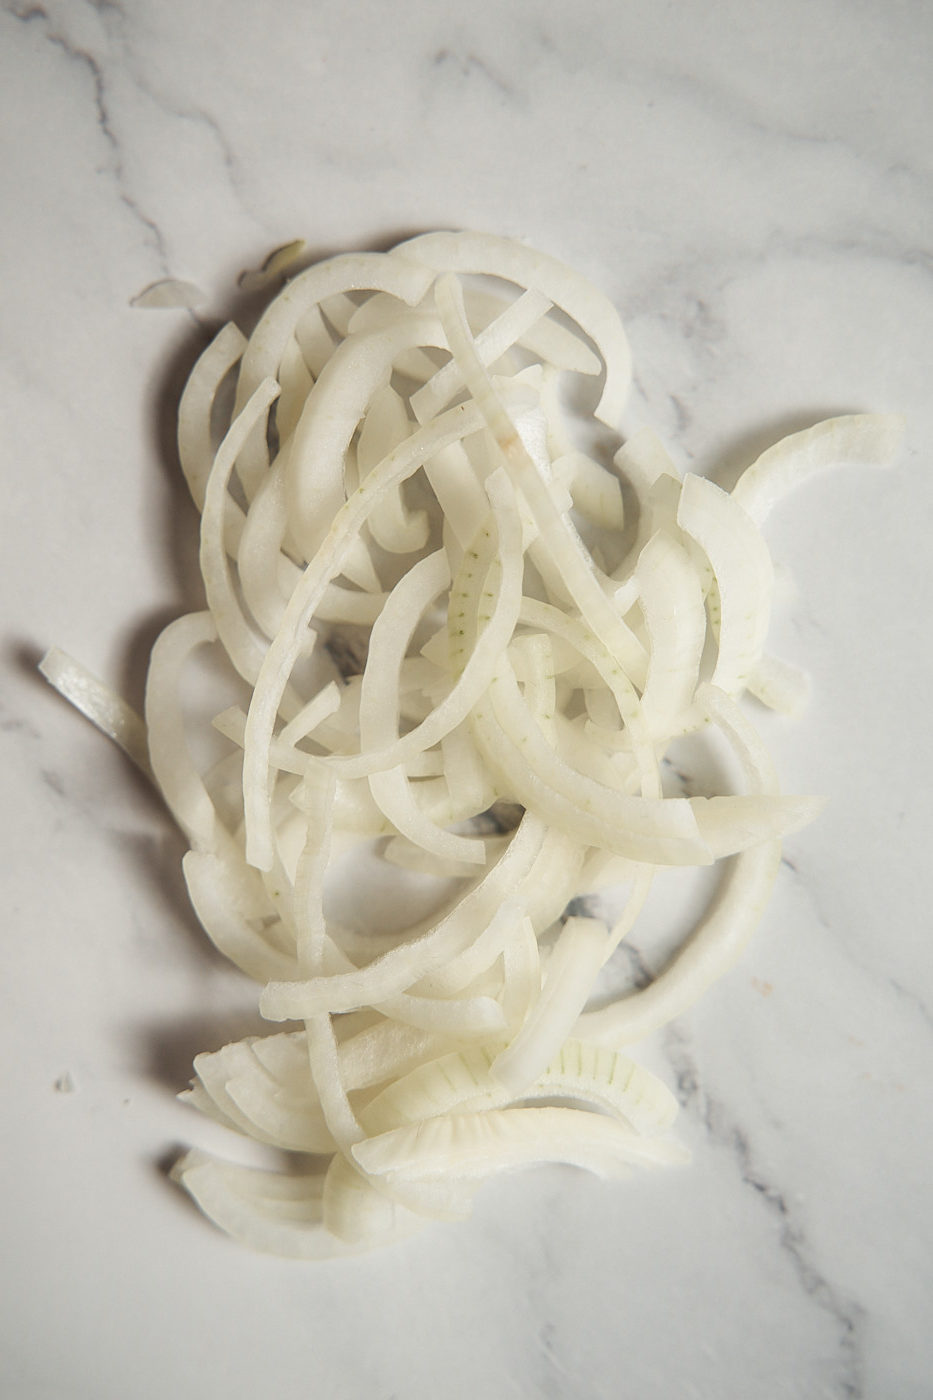 Half-rings or moon-sliced onions on the countertop